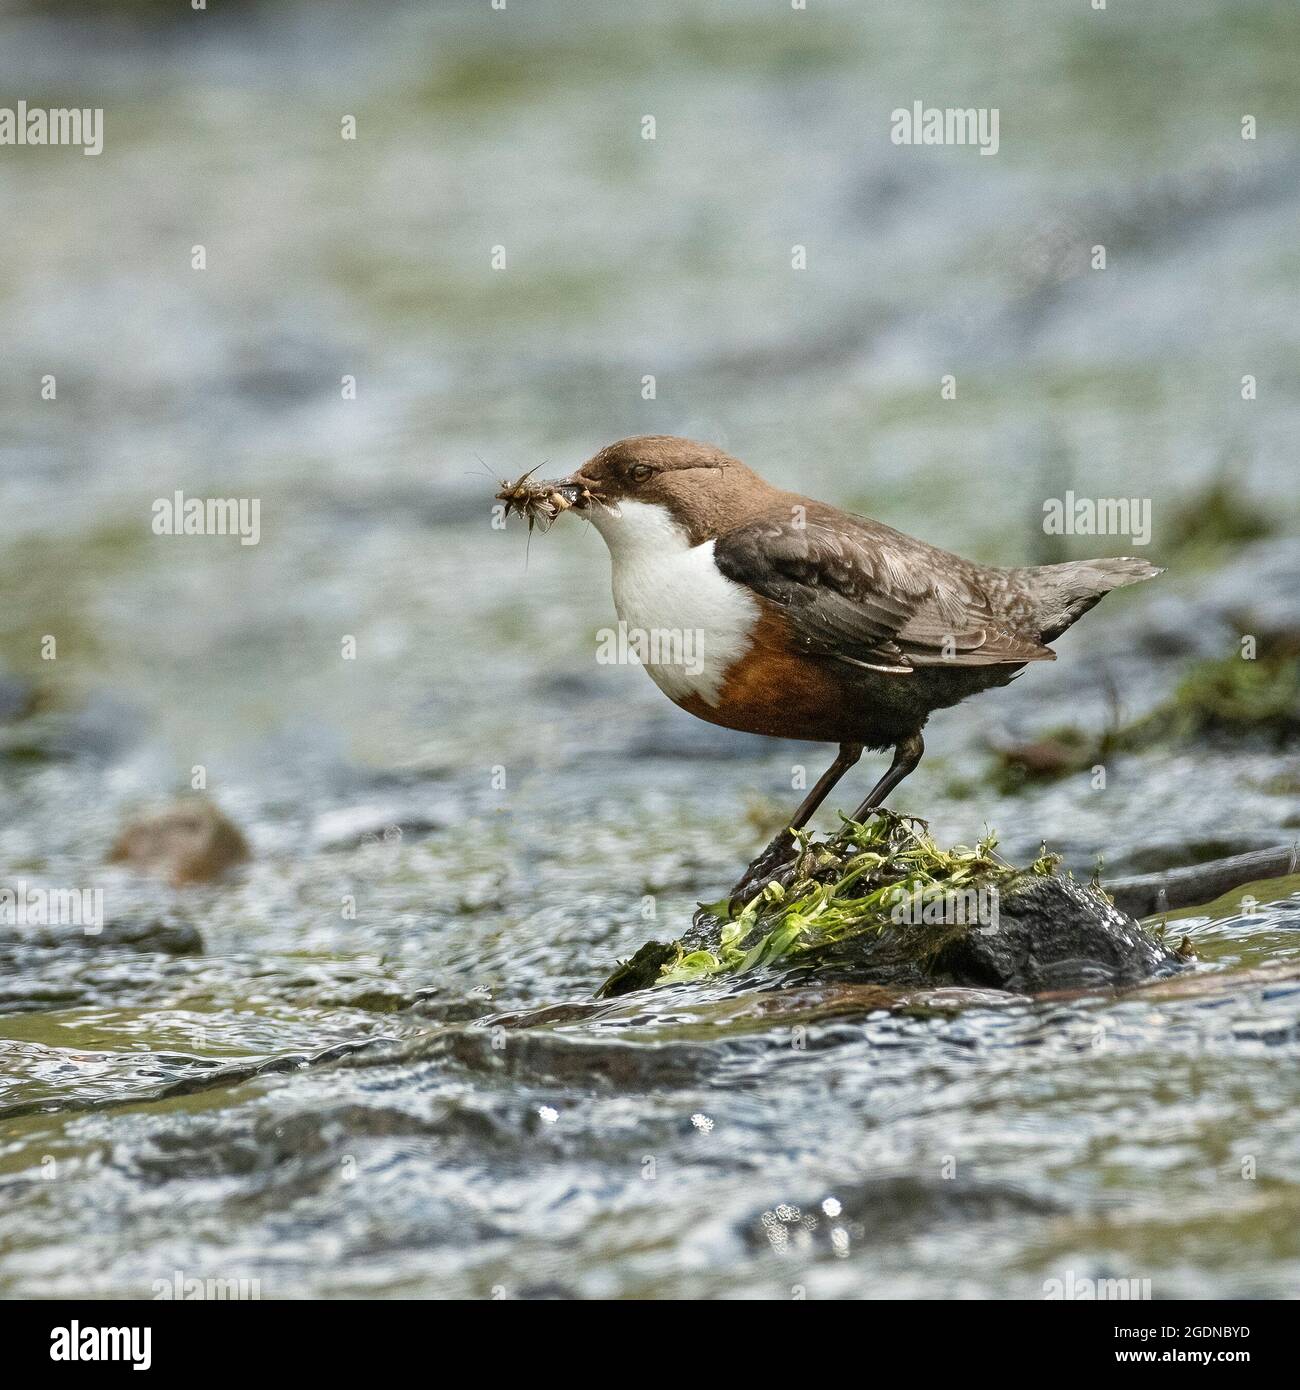 Dipper Catching Insects in River Stock Photo